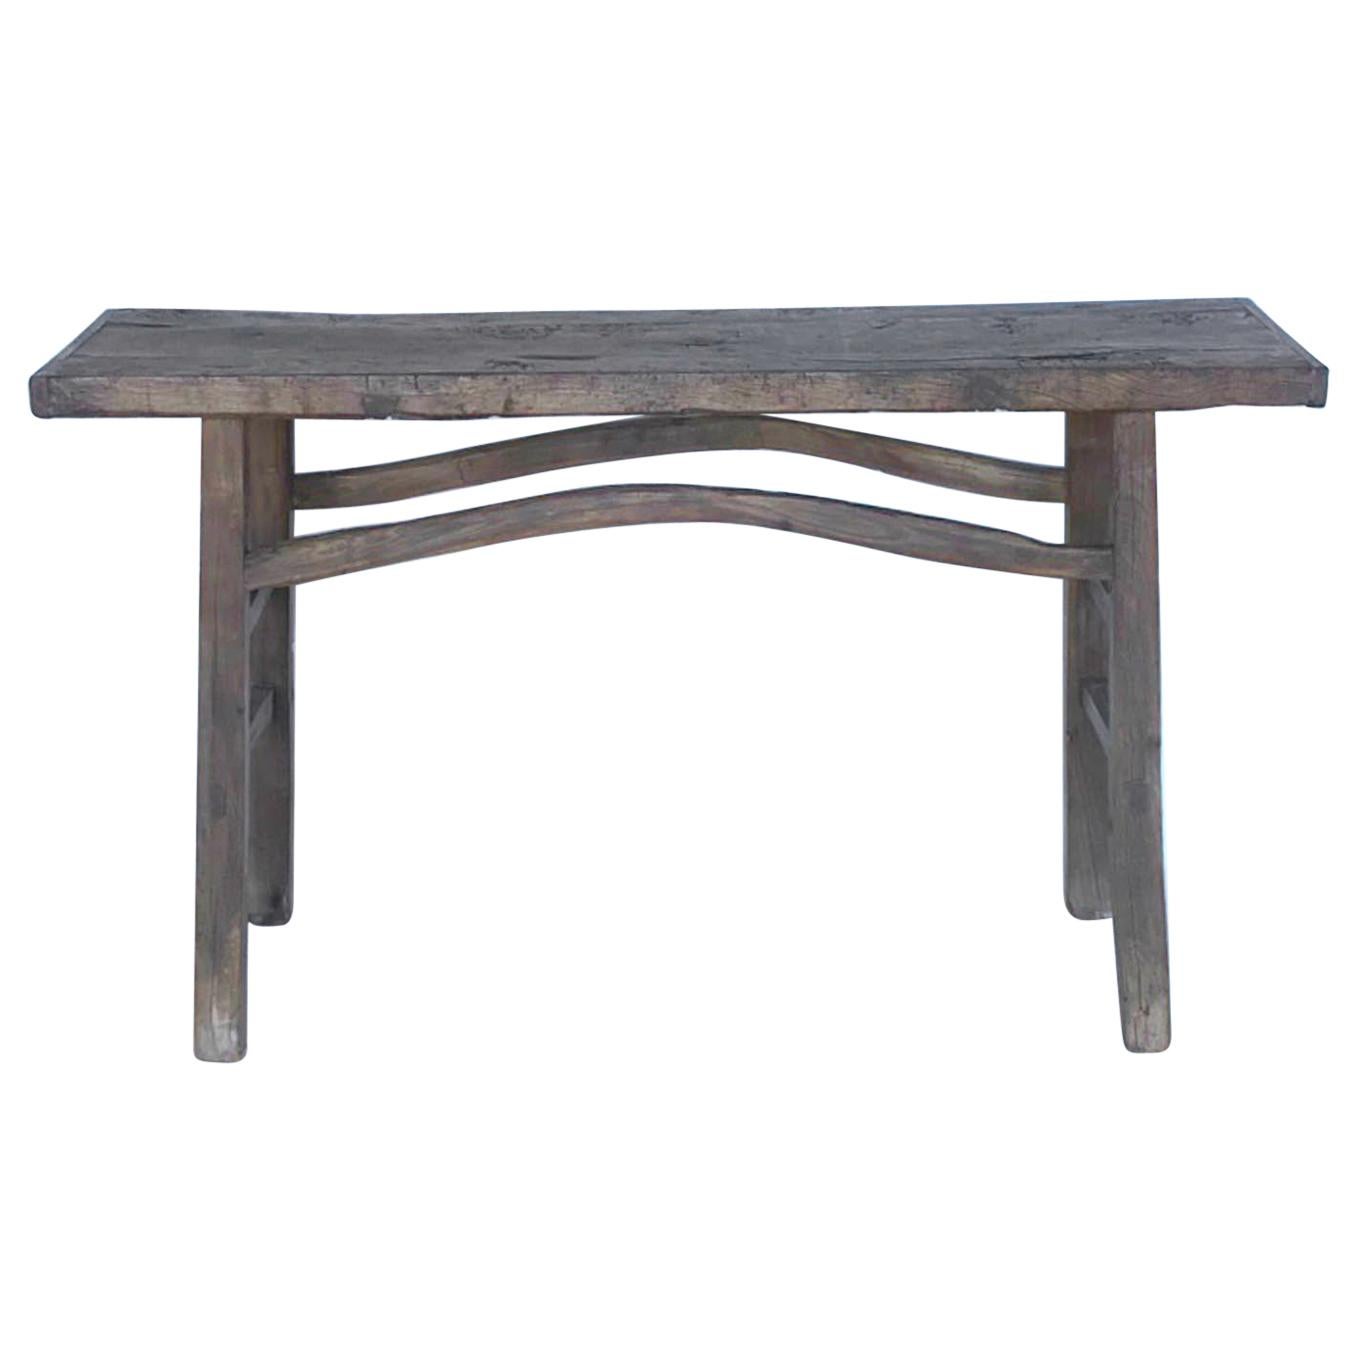 Rustic Elm Wood Console / Altar Table with Curved Stretchers